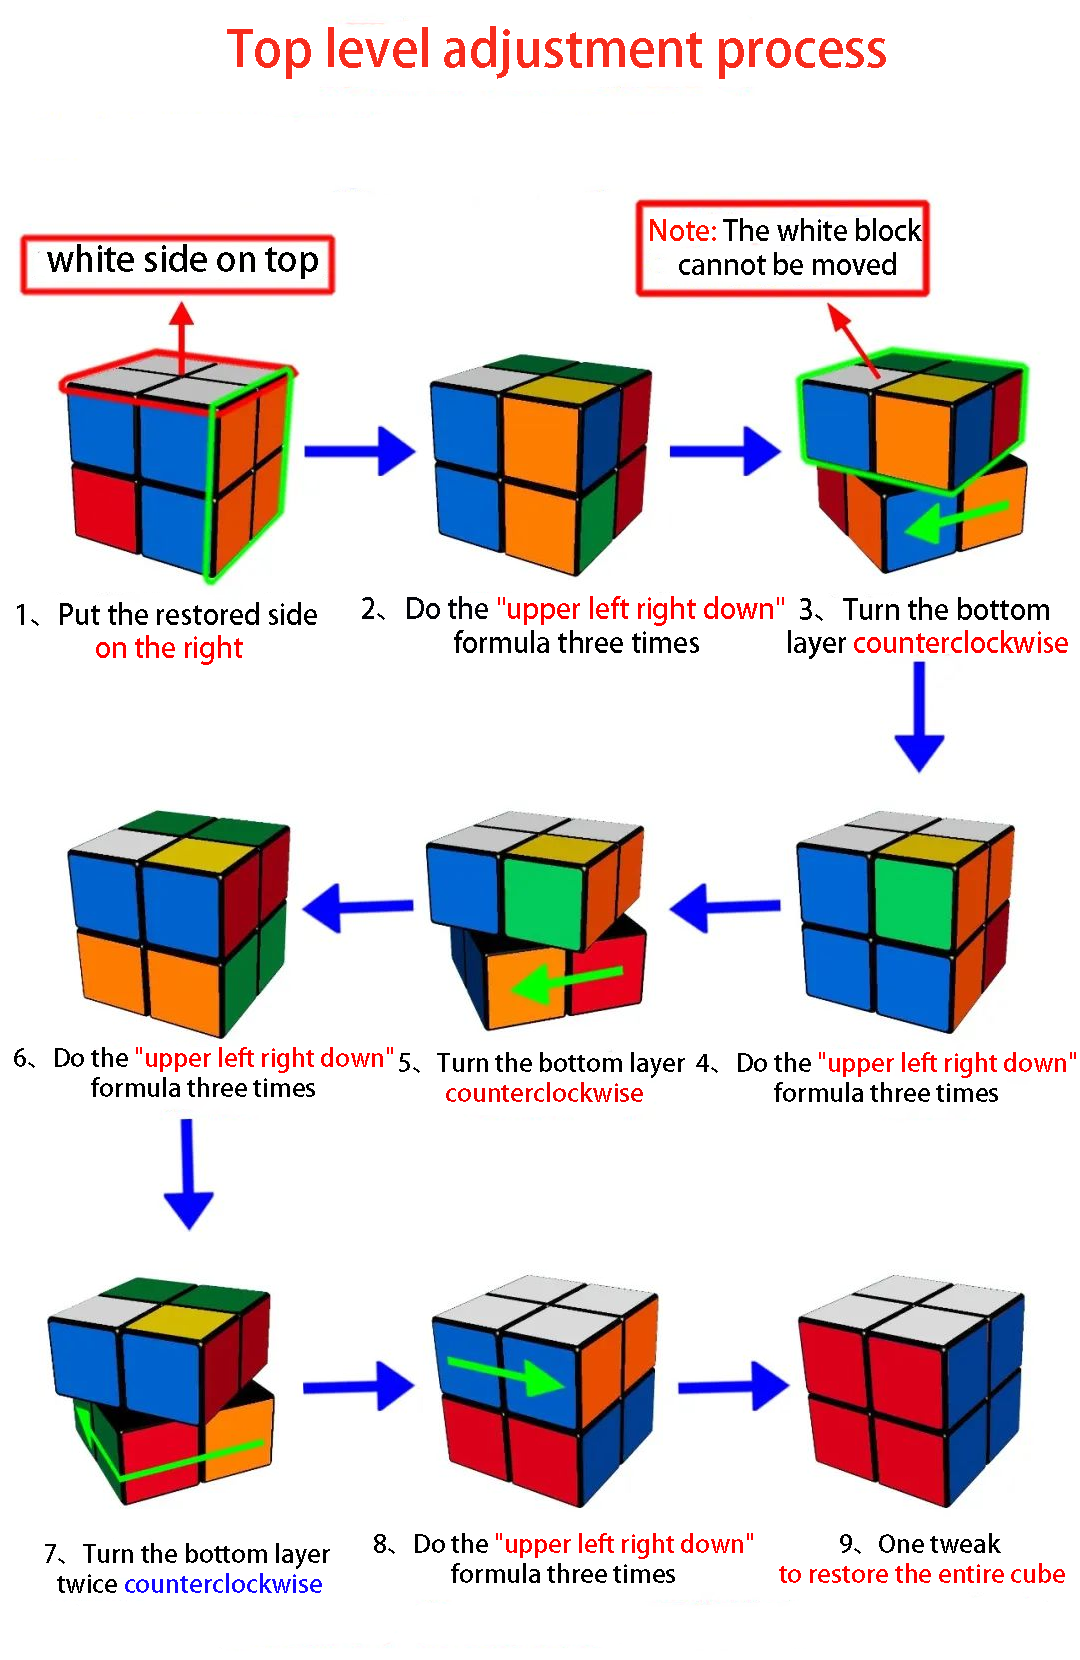 adjust the top layer to restore the rubiks cube